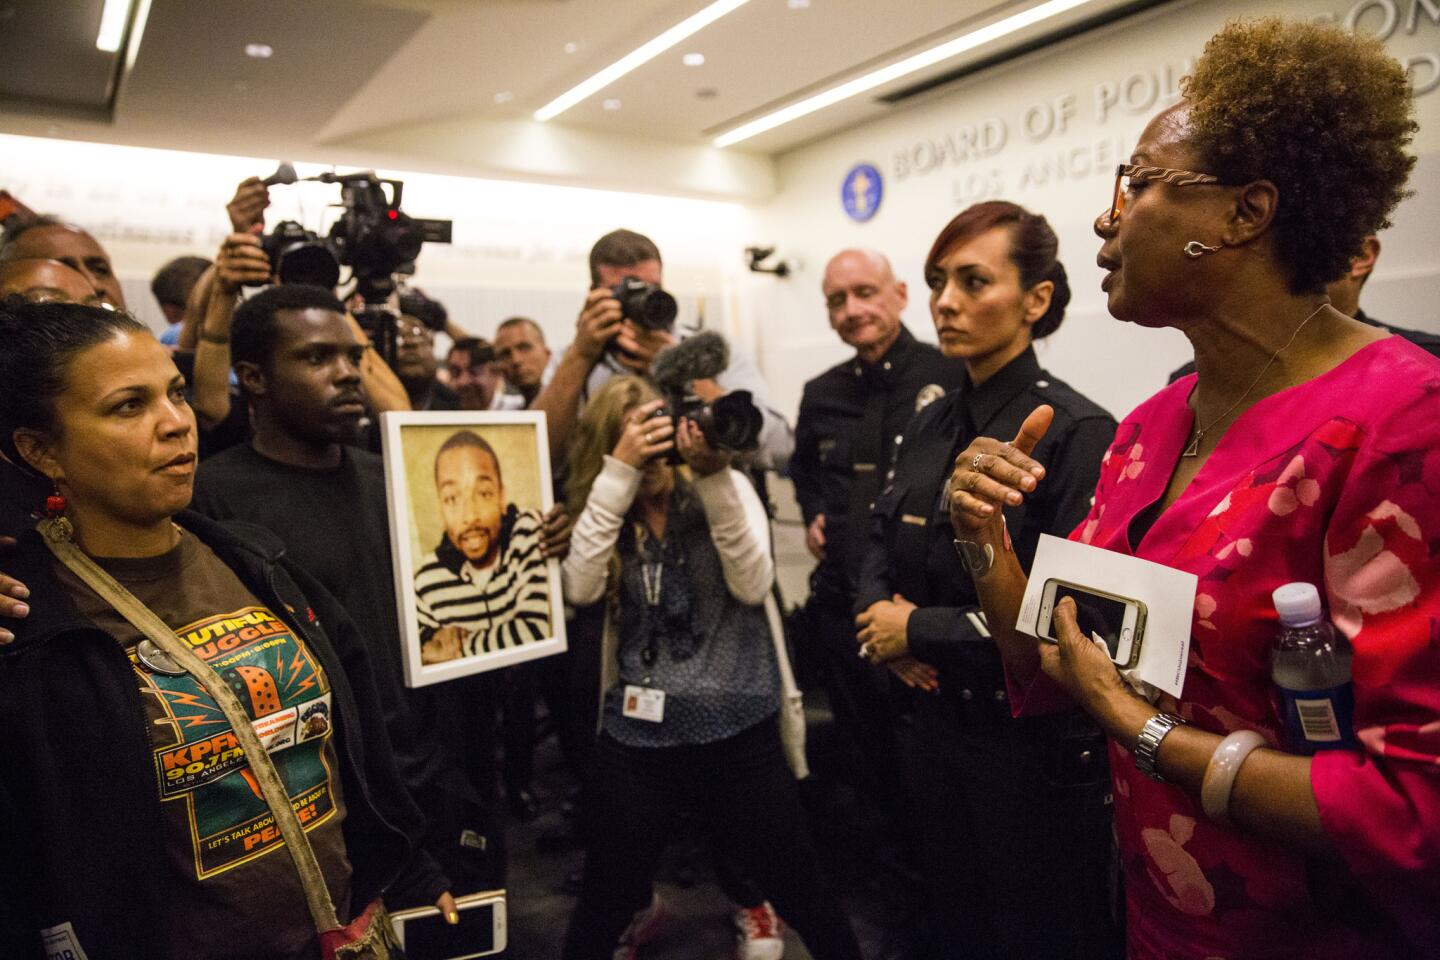 Police Commissioner Paula Madison, right, speaks with protesters at LAPD headquarters, explaining the commission's ruling on last year's shooting death of Ezell Ford.